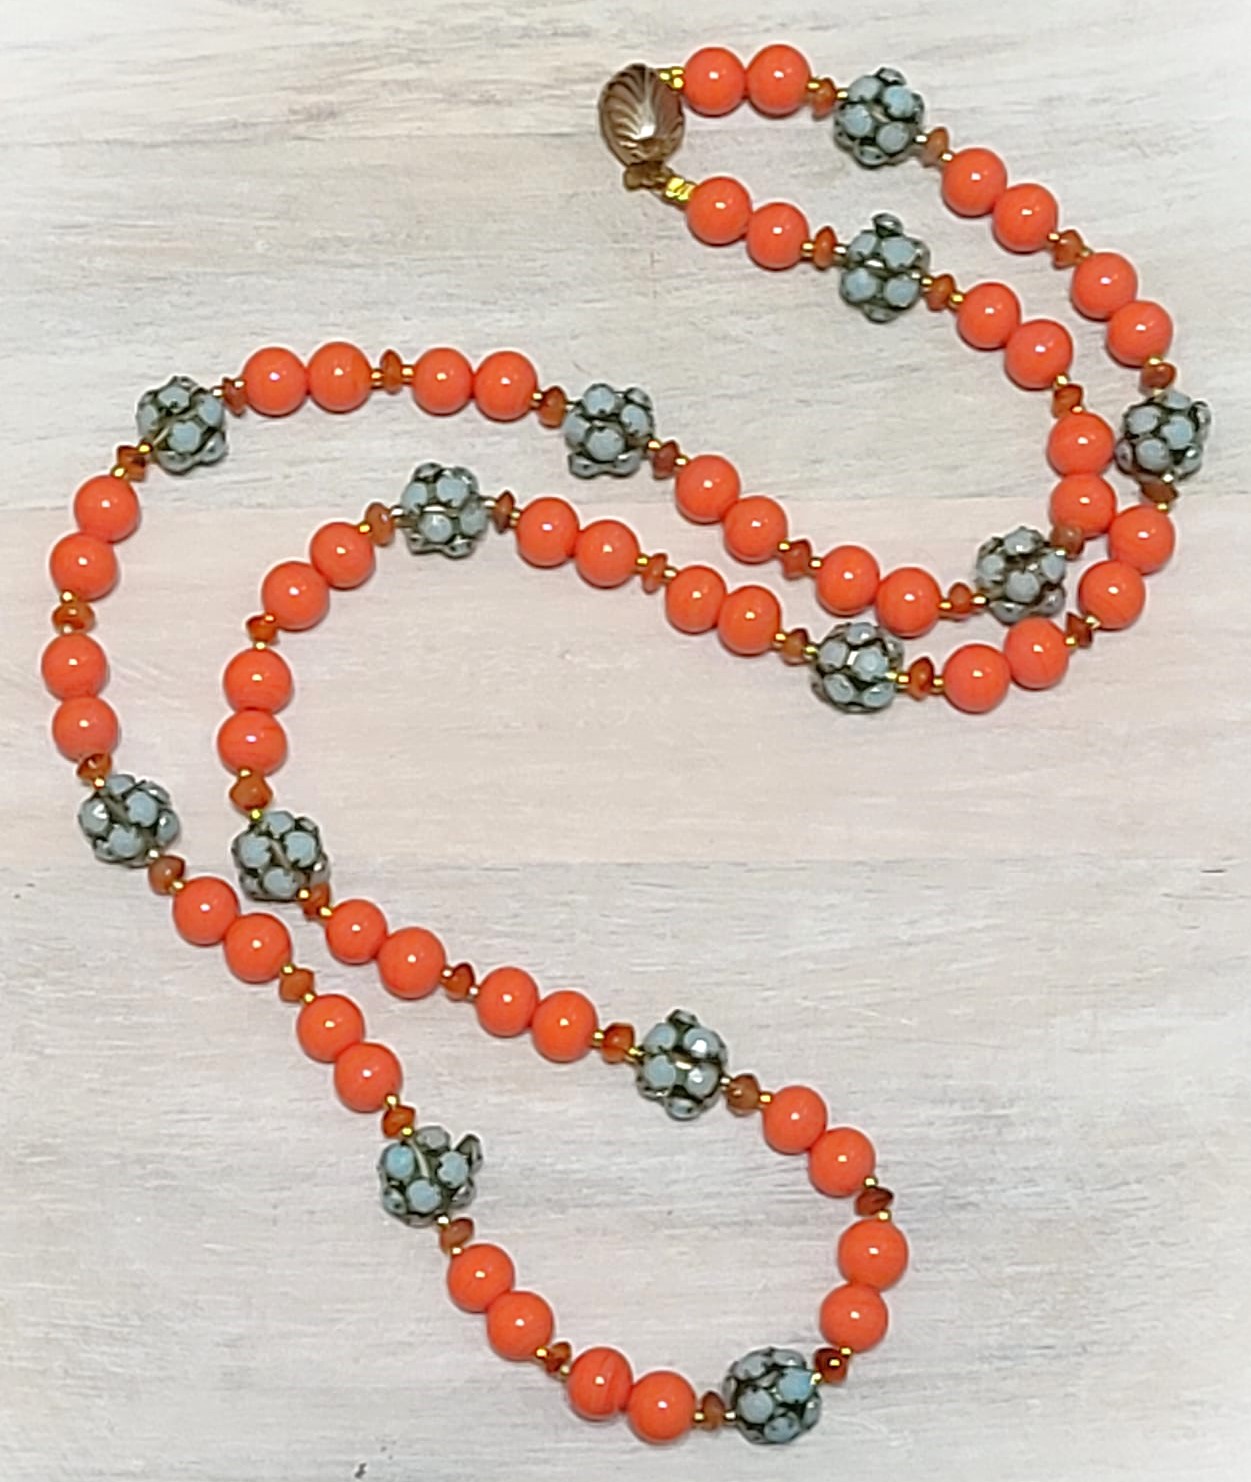 Bead necklace with turquoise and orange vintage scallop clasp